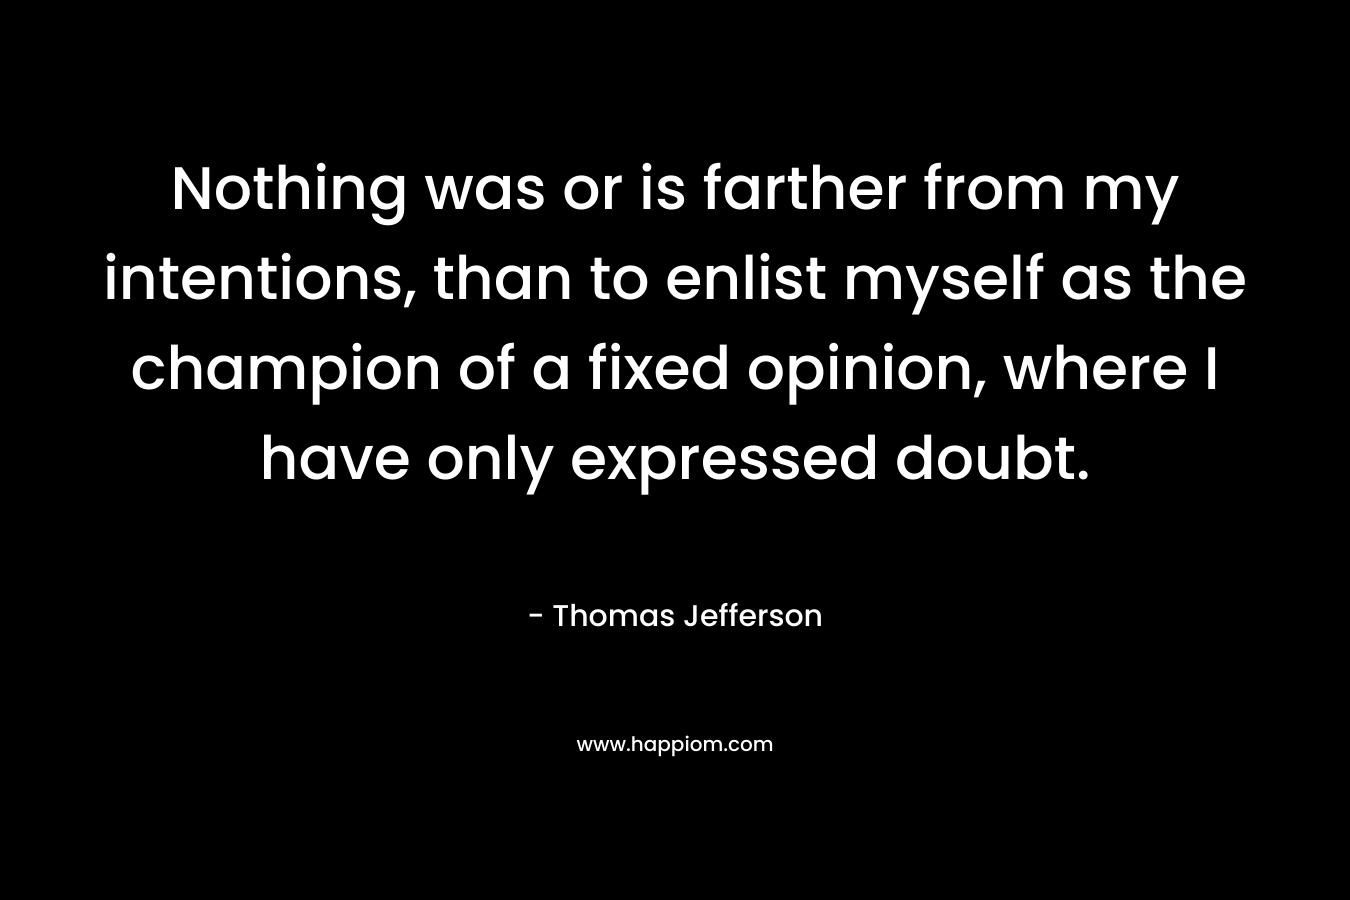 Nothing was or is farther from my intentions, than to enlist myself as the champion of a fixed opinion, where I have only expressed doubt.